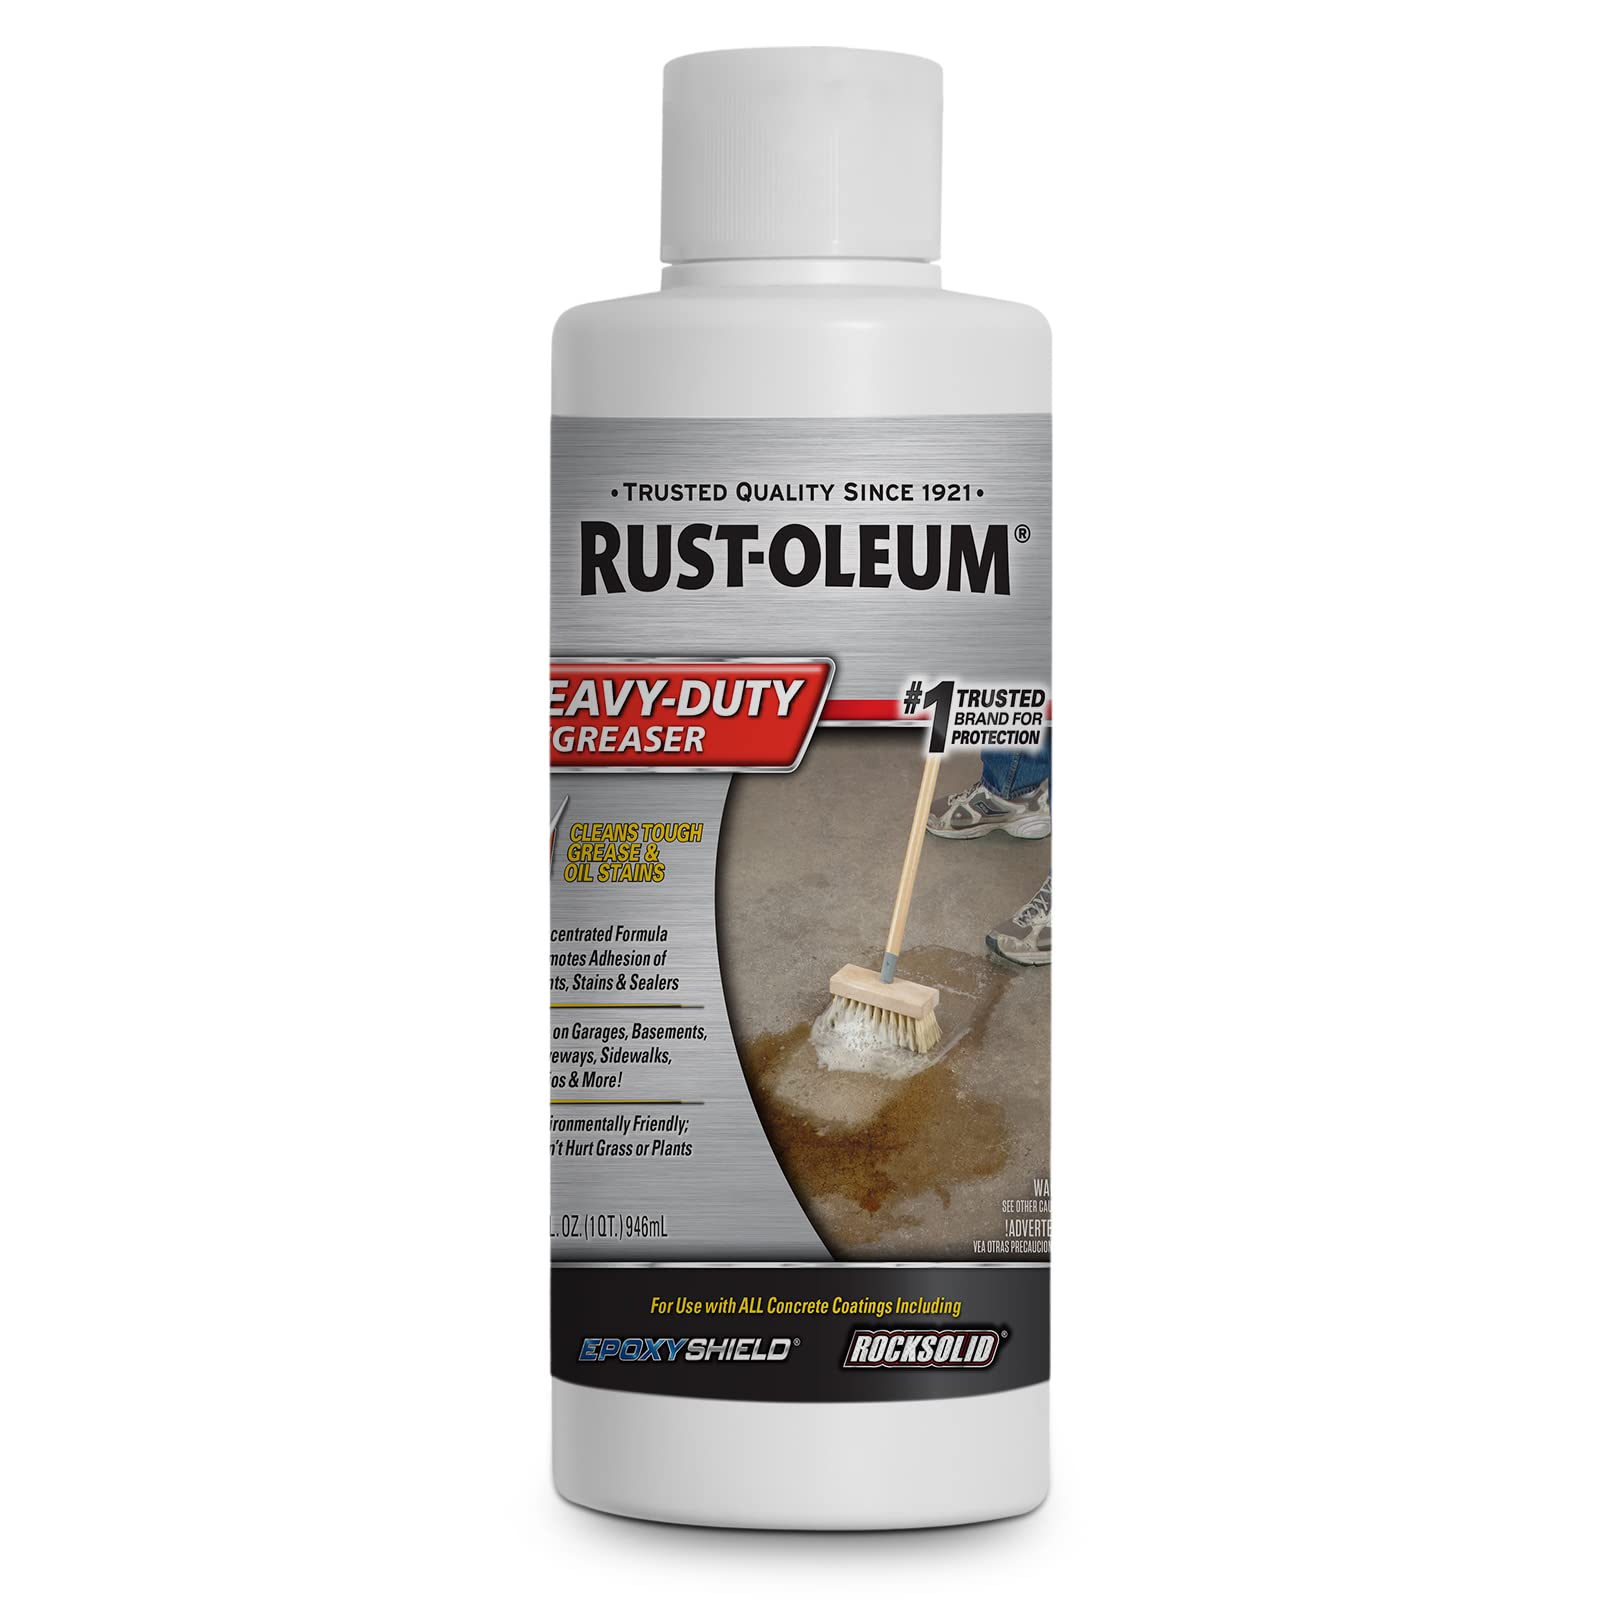 Centaurus AZ Rust Oleum Concentrated Heavy duty Degreaser-Ideal Garage Floor Cleaner-Effective Degreaser Cleaner Heavy duty Automotive-Available with Premium Quality Gloves-32oz